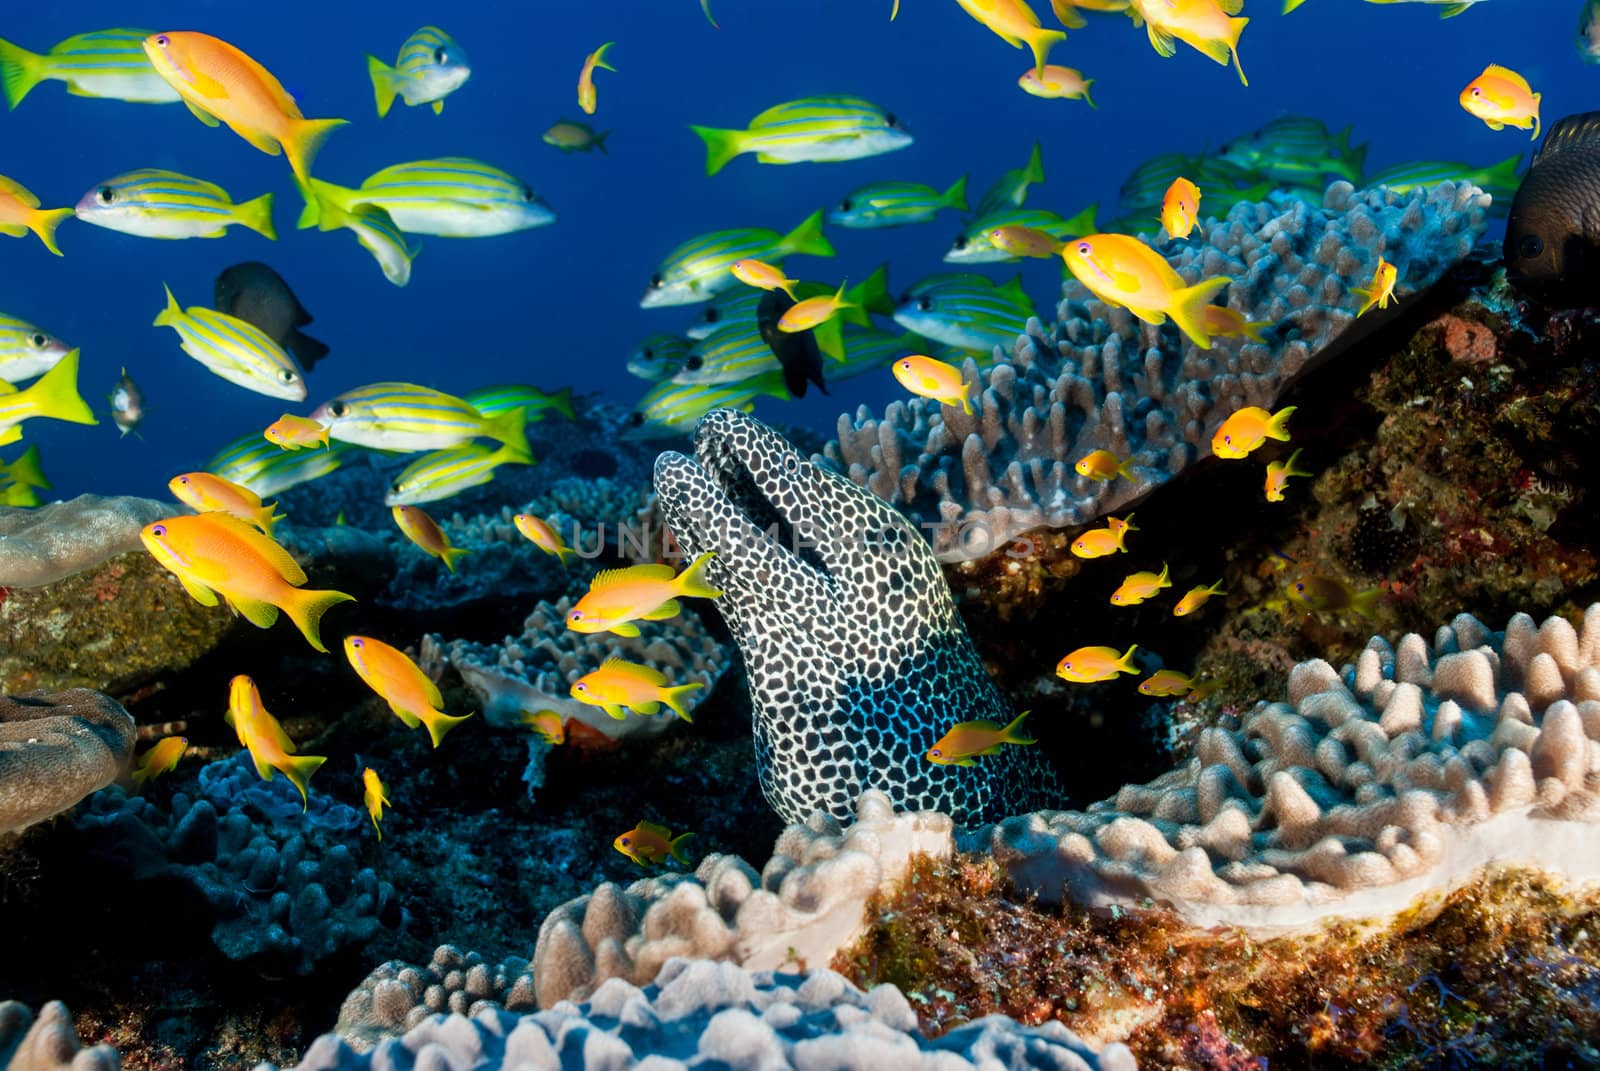 Spotted Eel and fish in Reef Scene by fiona_ayerst